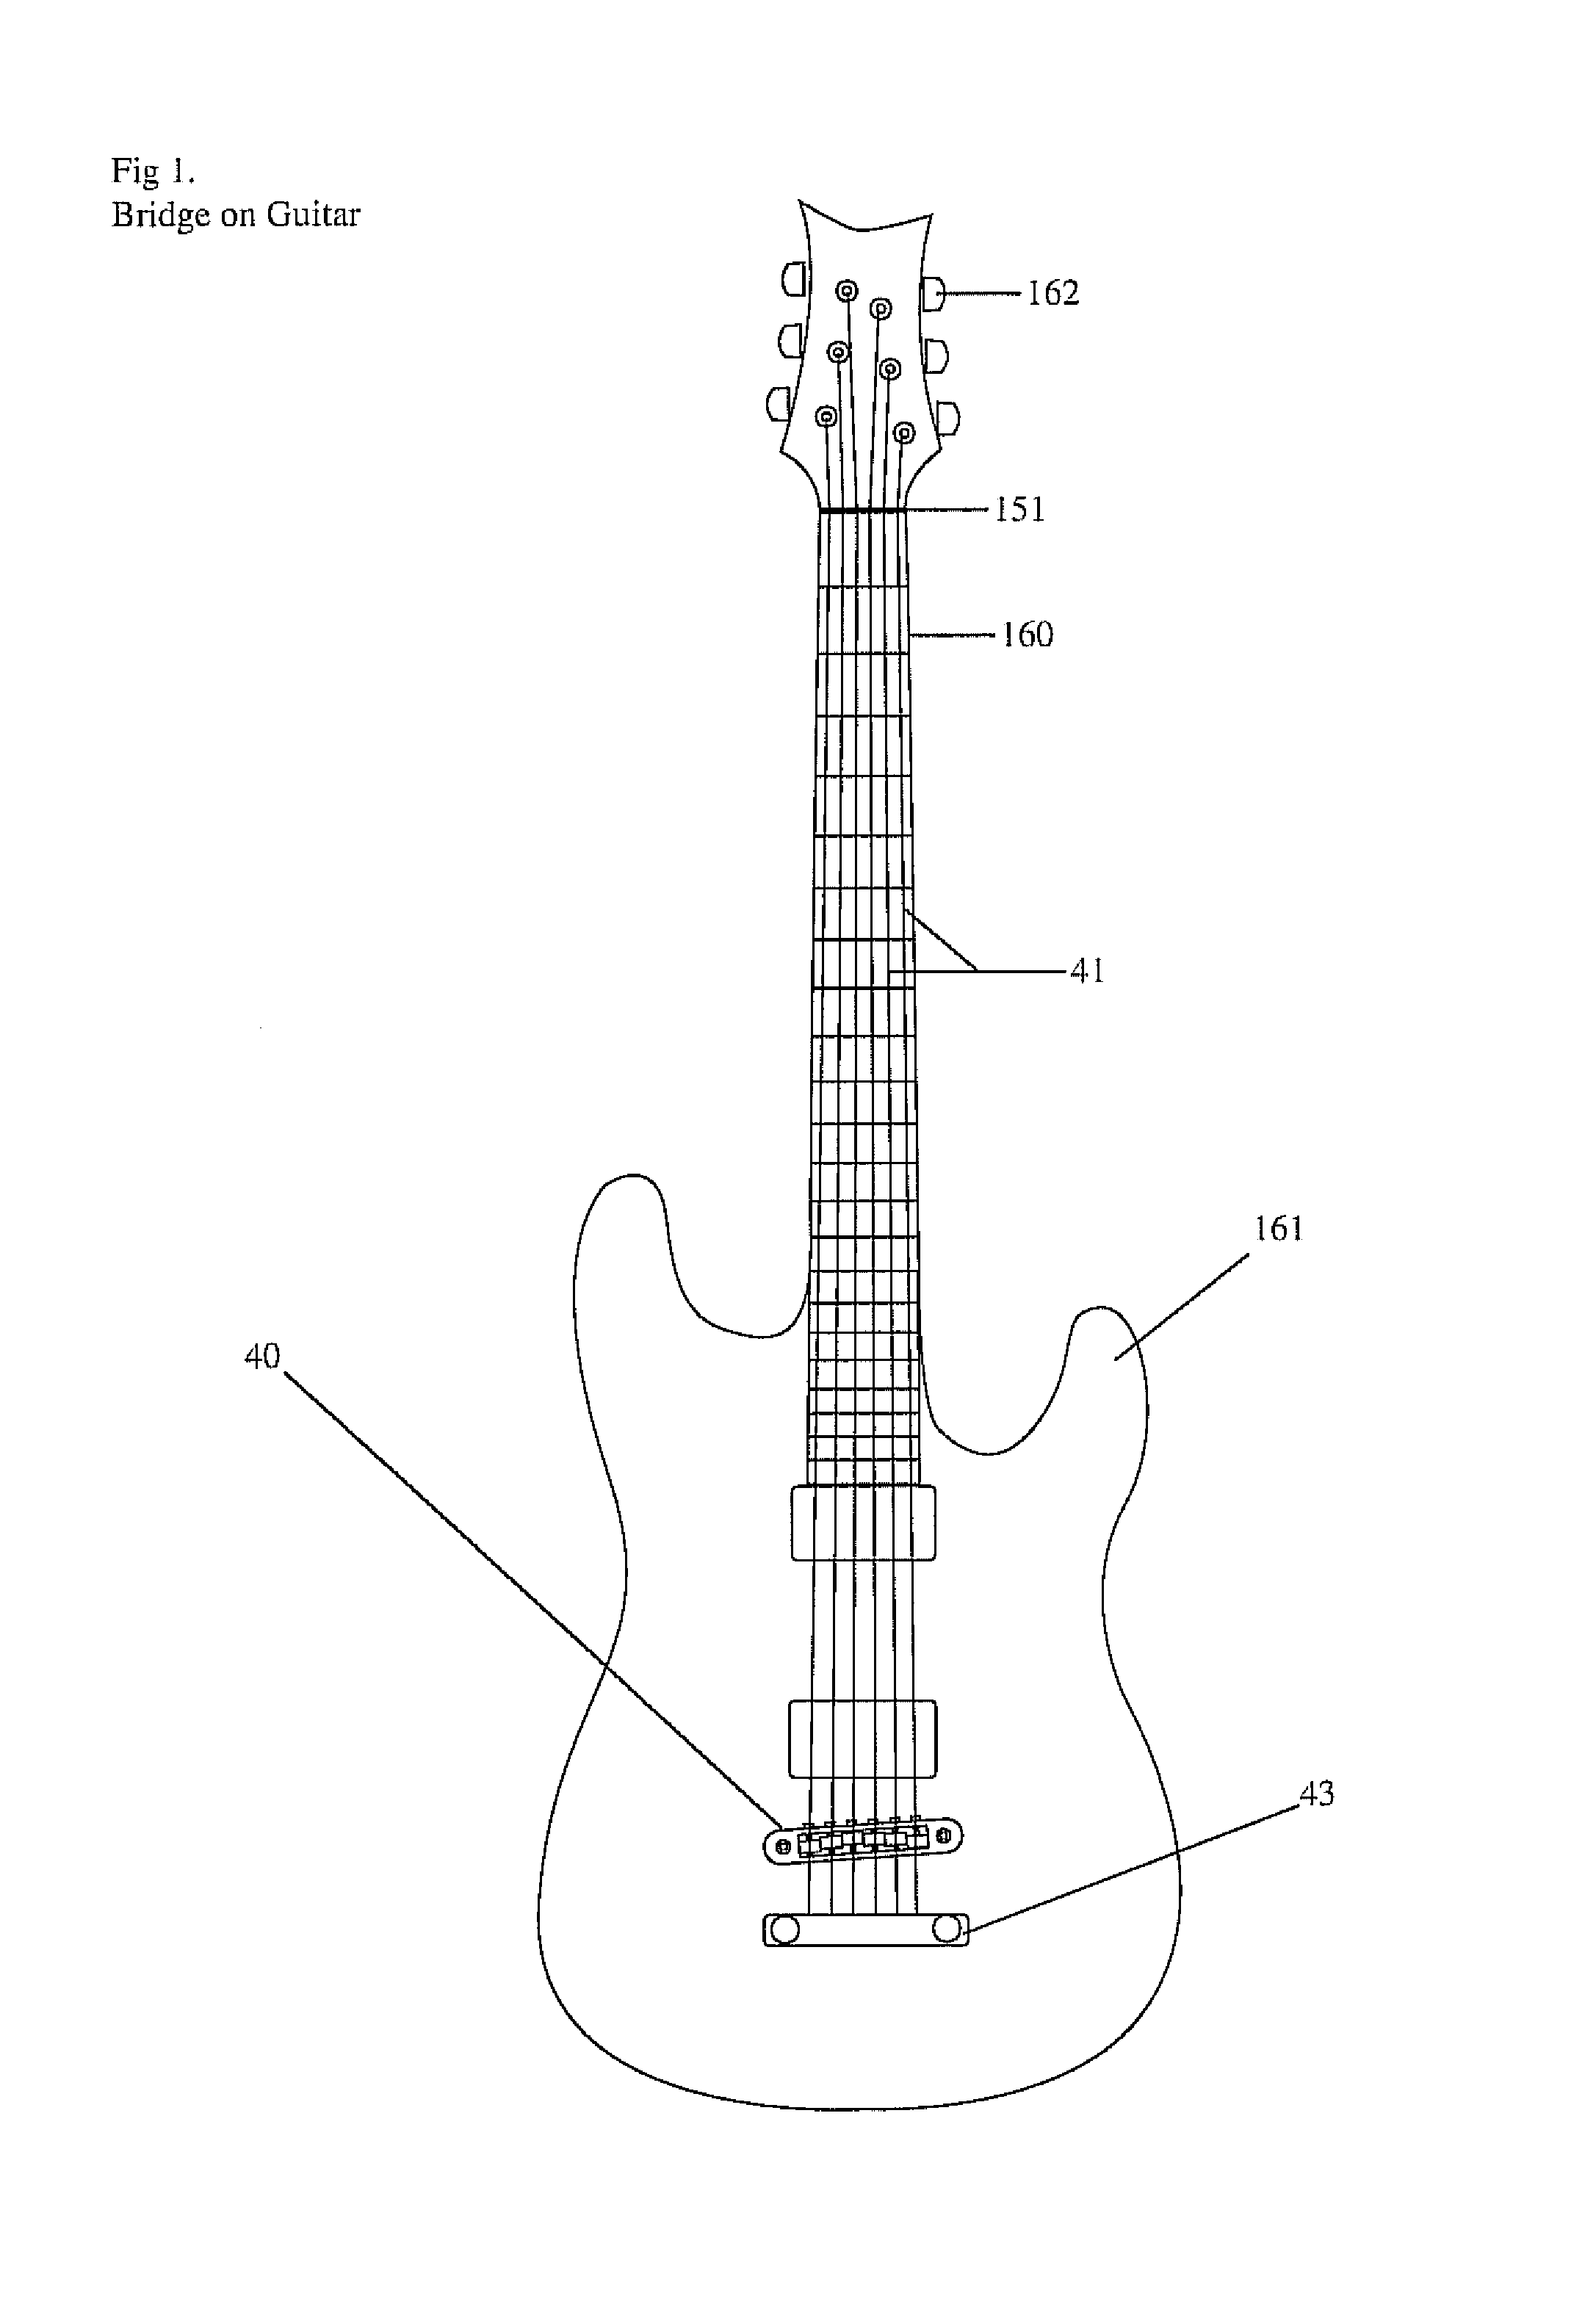 Bridge for a Stringed Musical Instrument